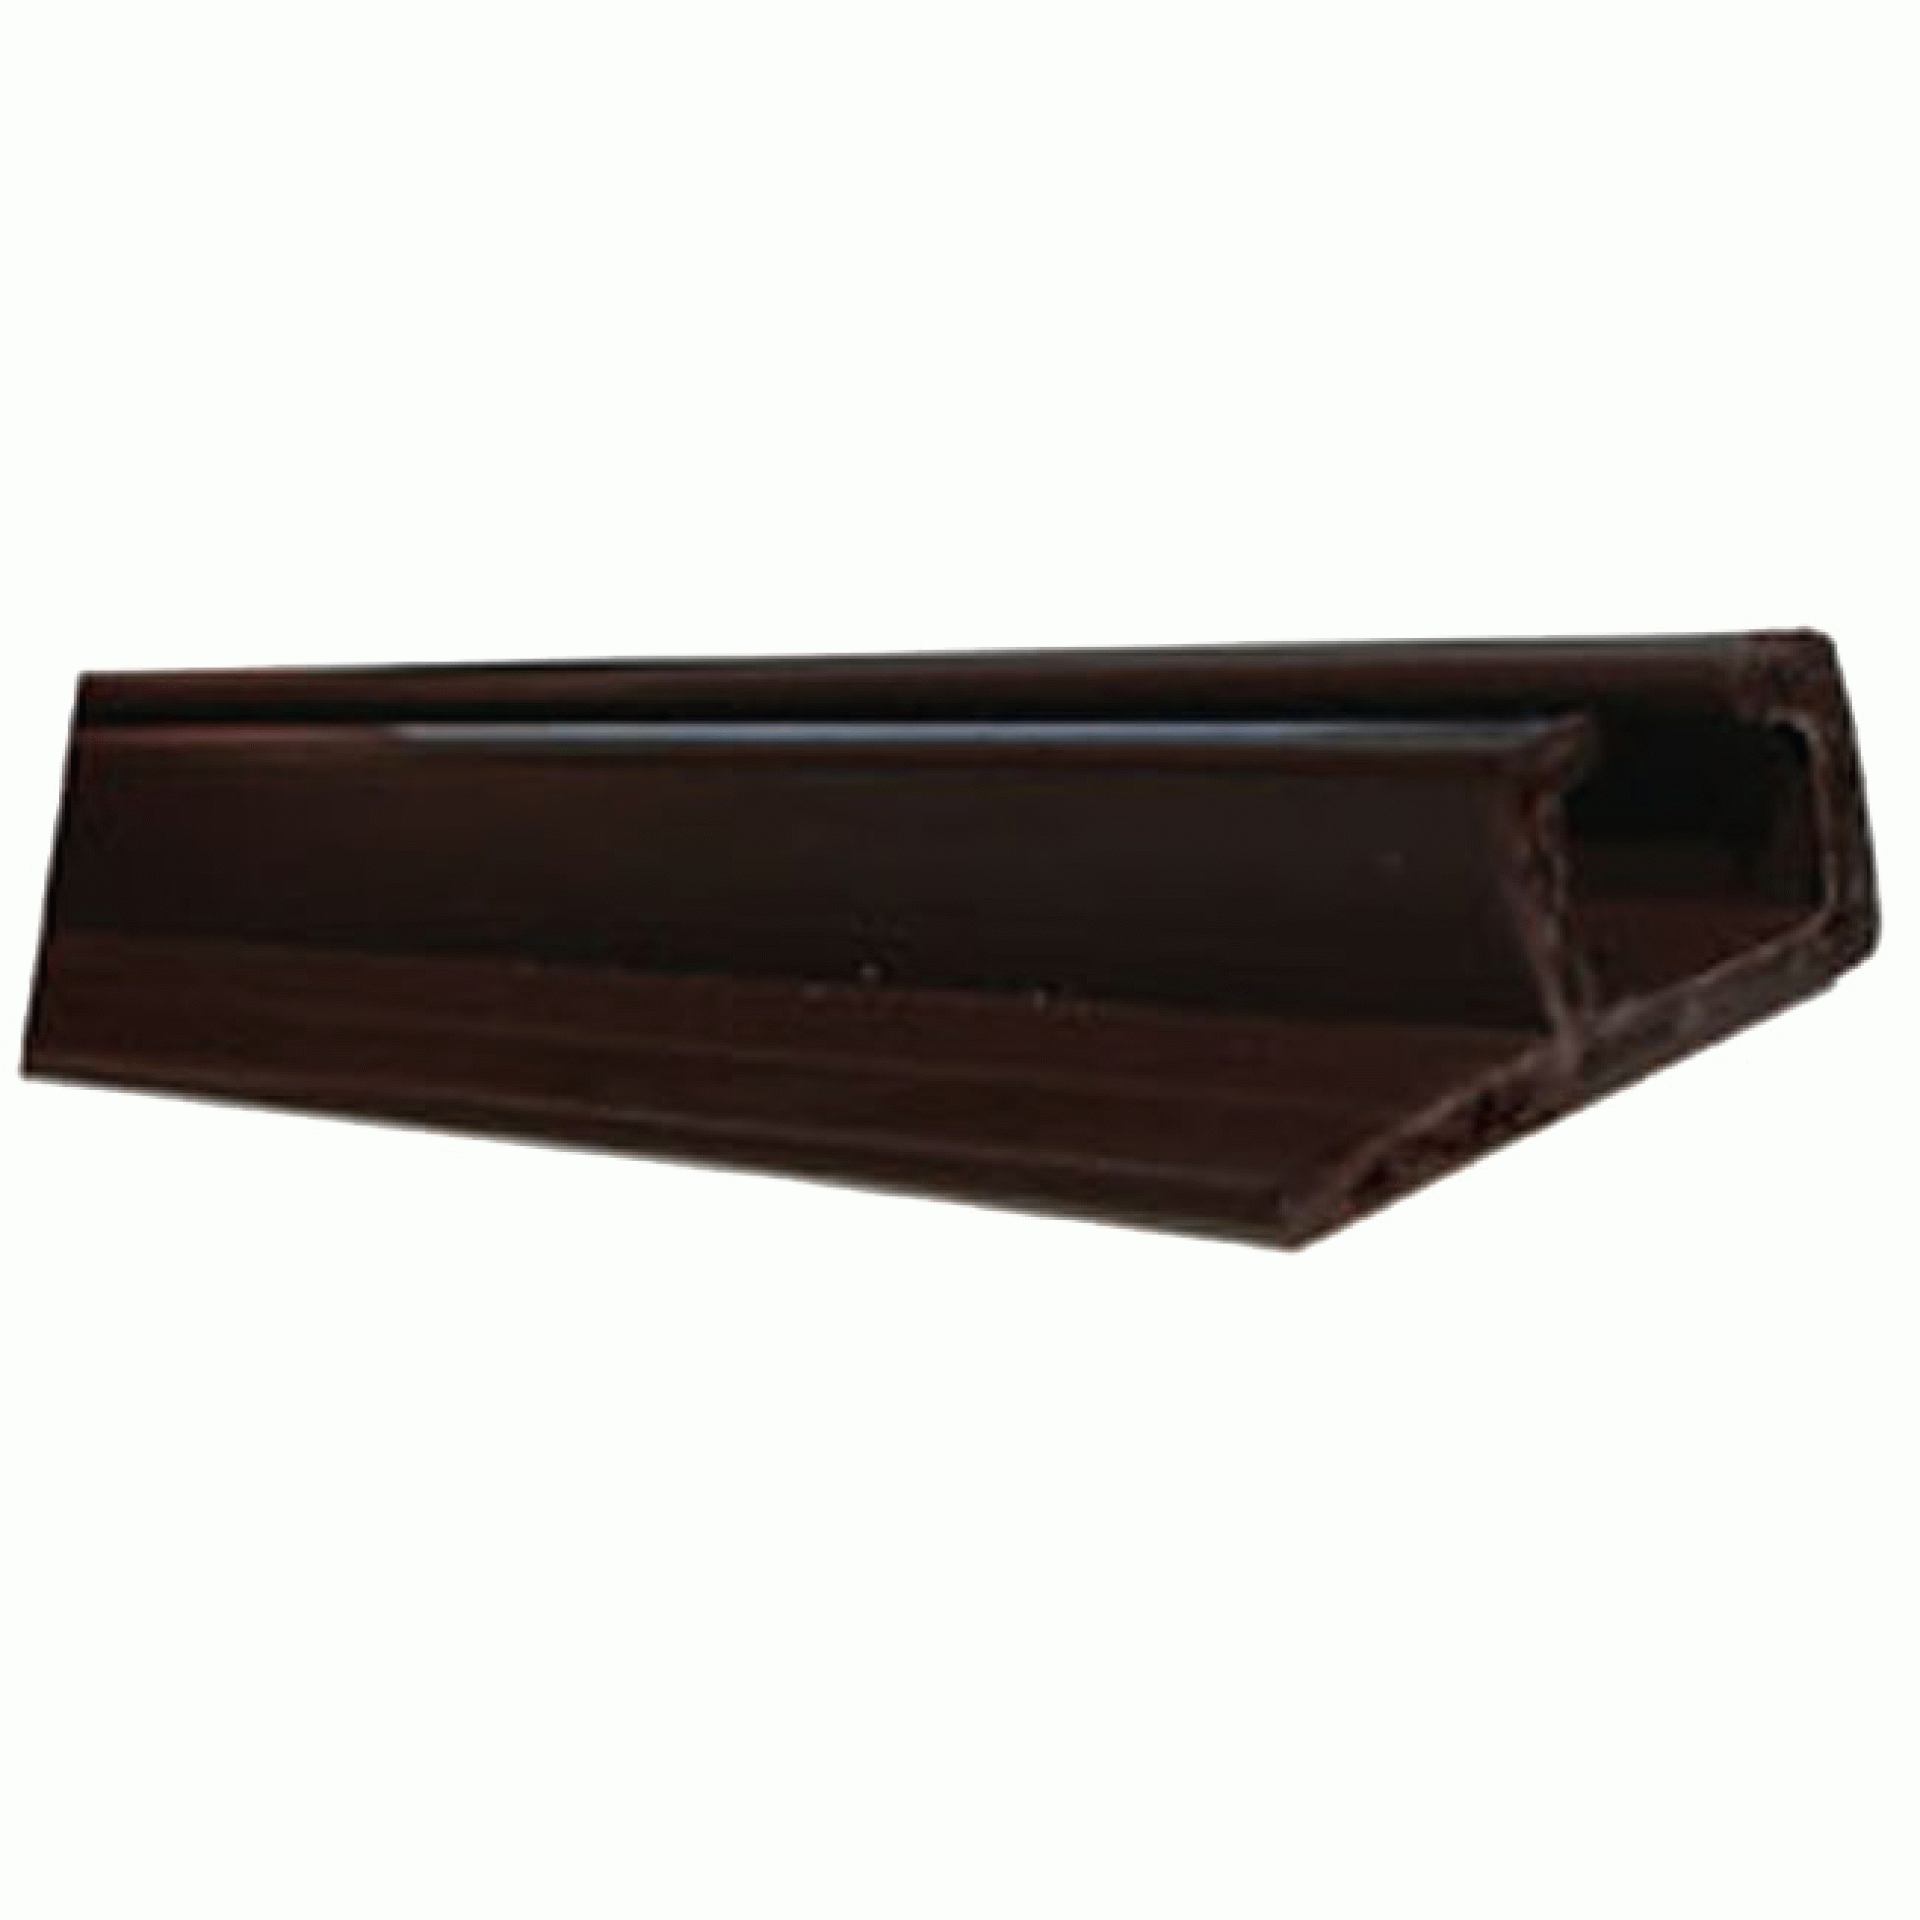 J R PRODUCTS | 80311 | TRACK CEILING MOUNTED SLIDE 96" BROWN TYPE "C"